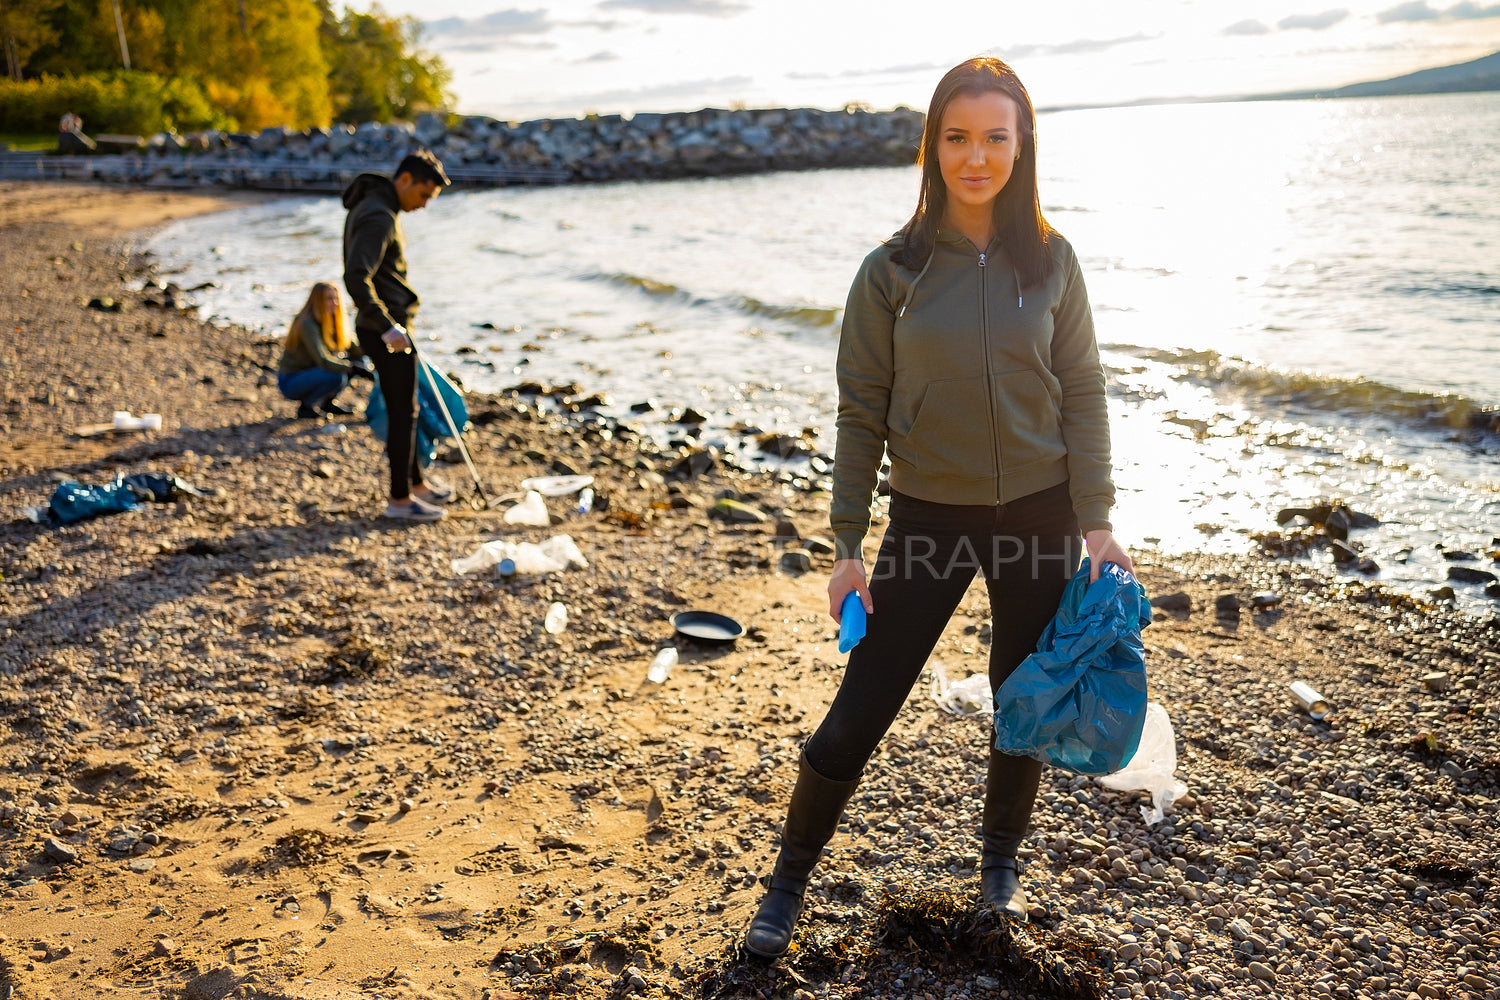 Smiling young woman cleaning beach with volunteers during sunset